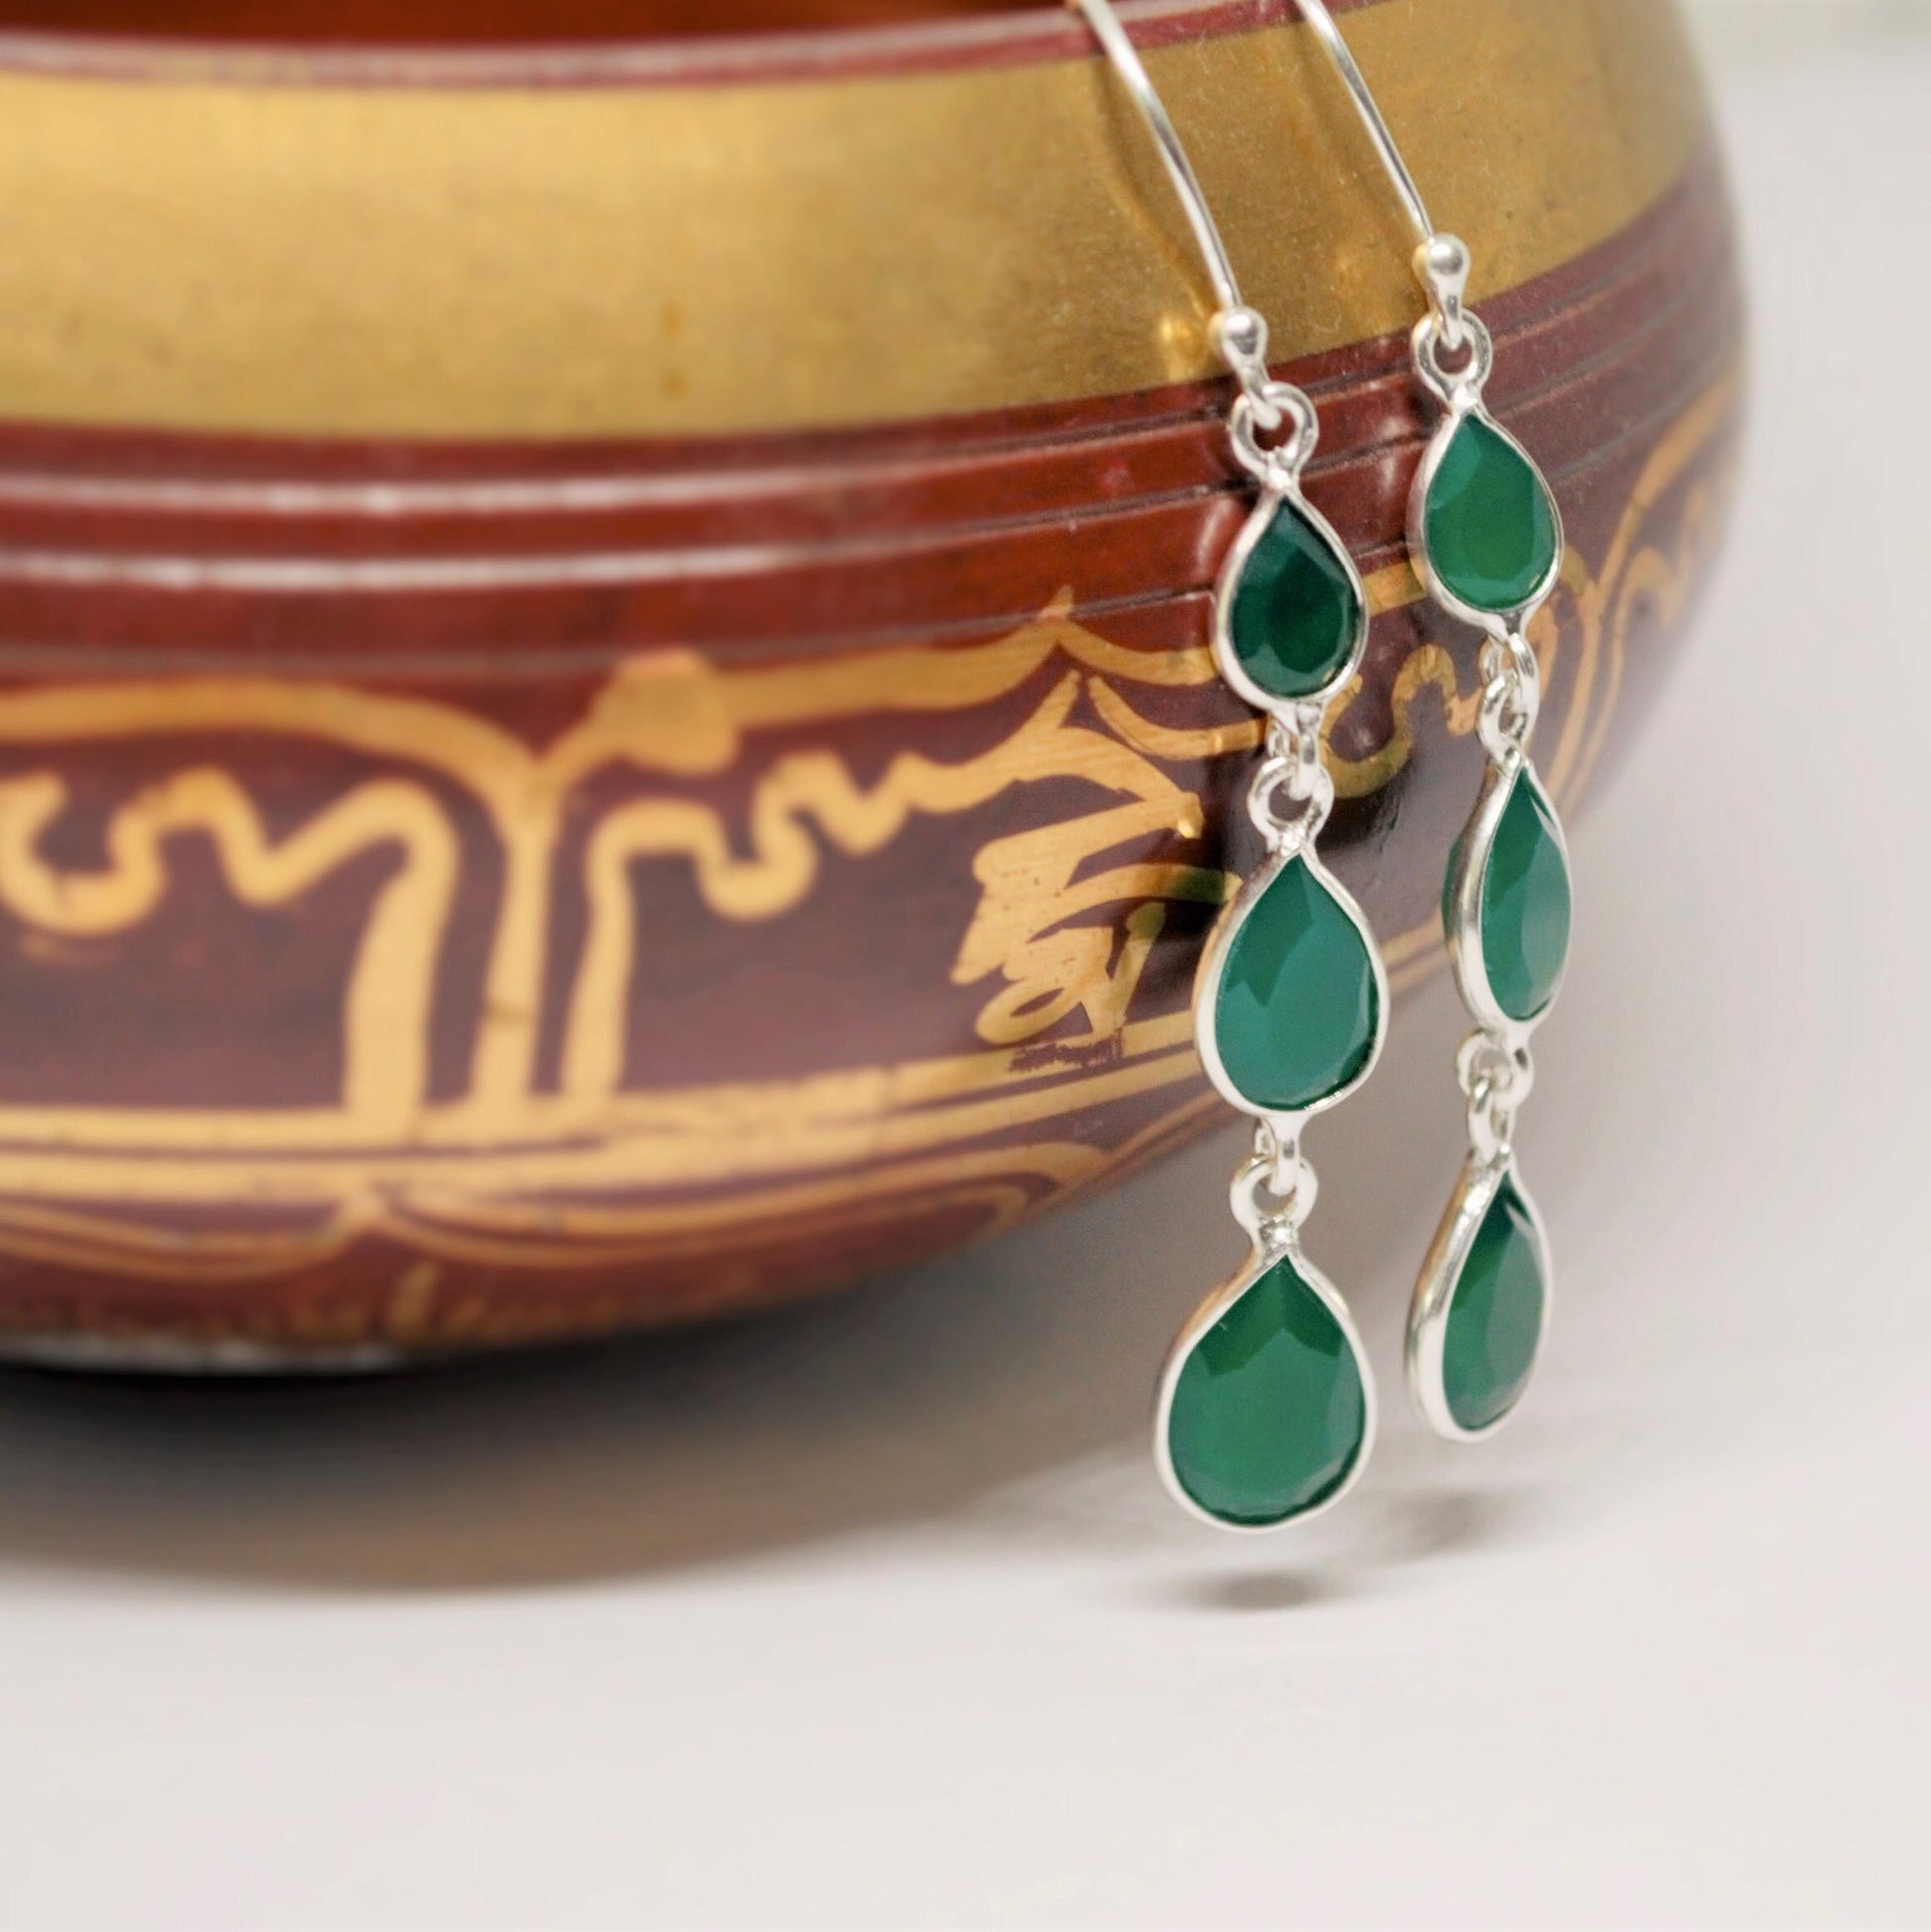 Green Onyx Sterling Silver Drop Earrings, Green Gemstone Dangle Earrings, Unique Statement Earrings, Bridesmaid Gift, Birthday Gifts For Her